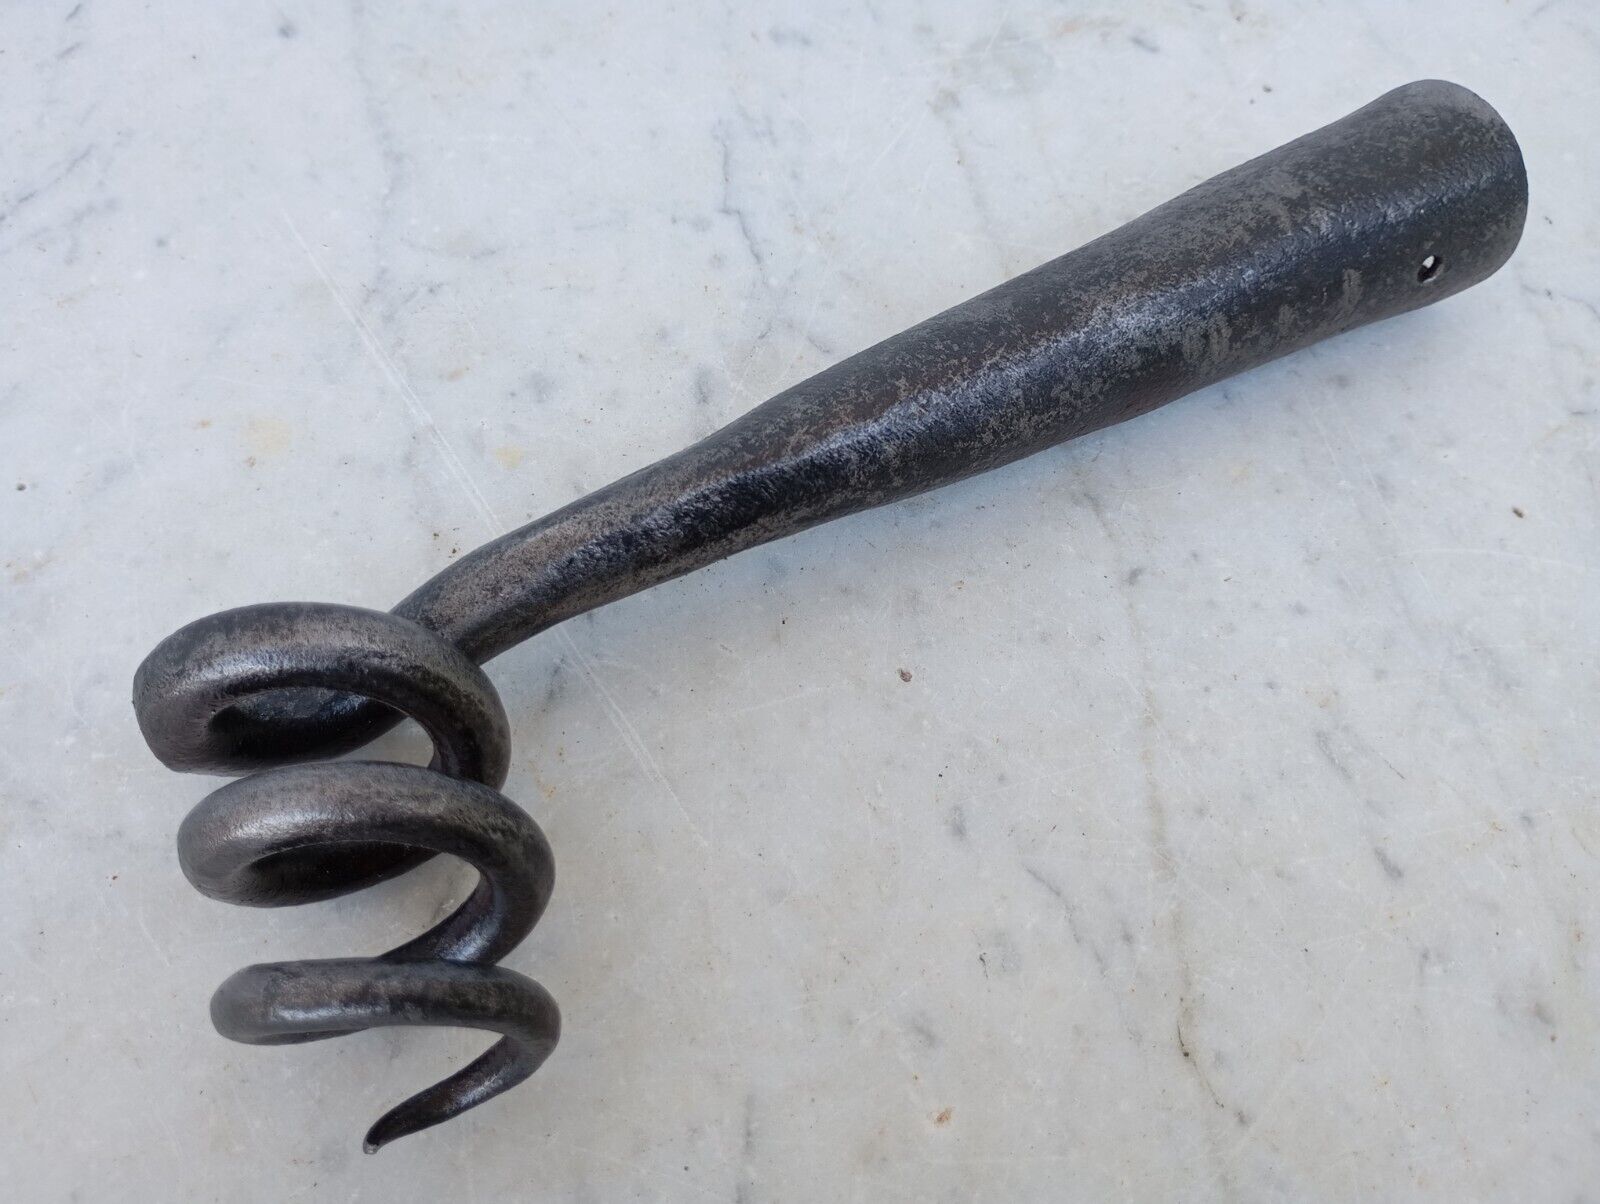 Antique Wrought Steel Rare Tool Spiral Hook to Catch Bullfight Bull by the Horn